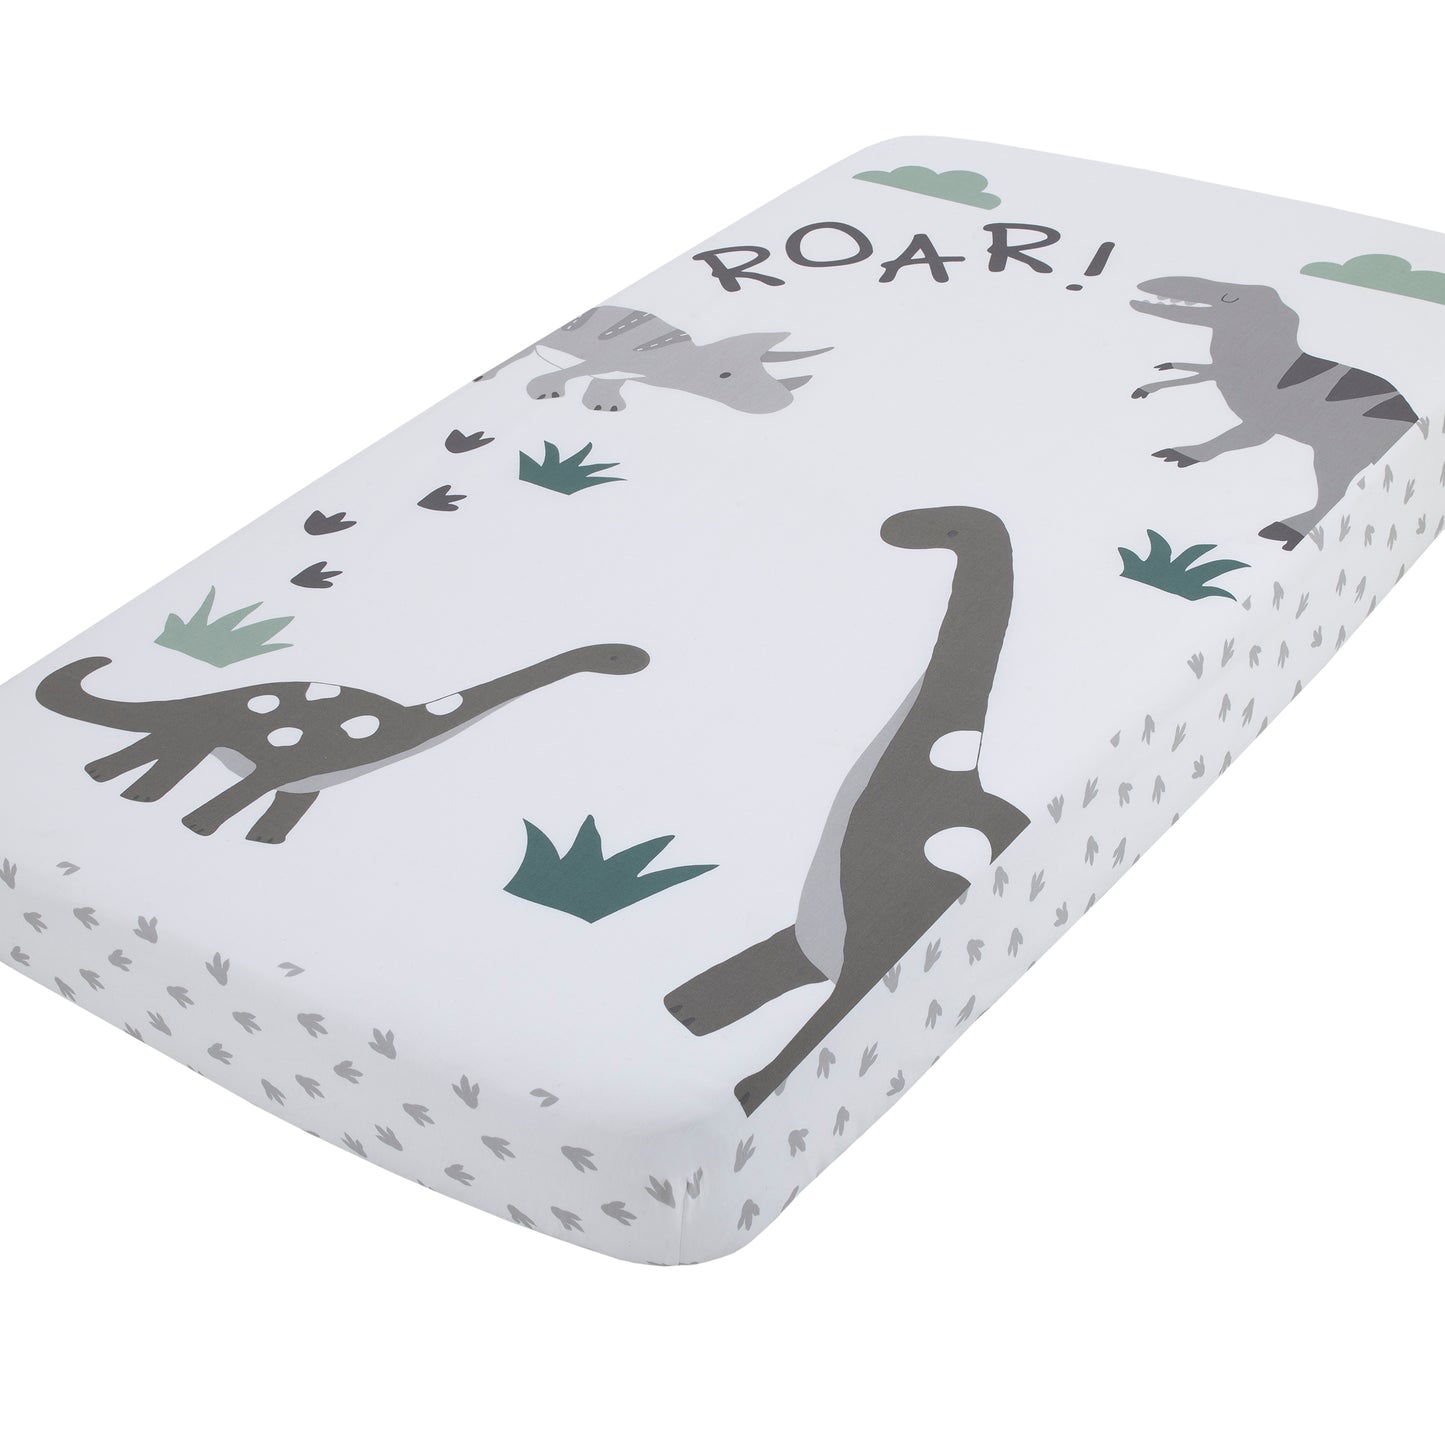 NoJo Baby-Saurus Photo Op ROAR White, Gray, and Green Dinosaur with Clouds Nursery Fitted Crib Sheet